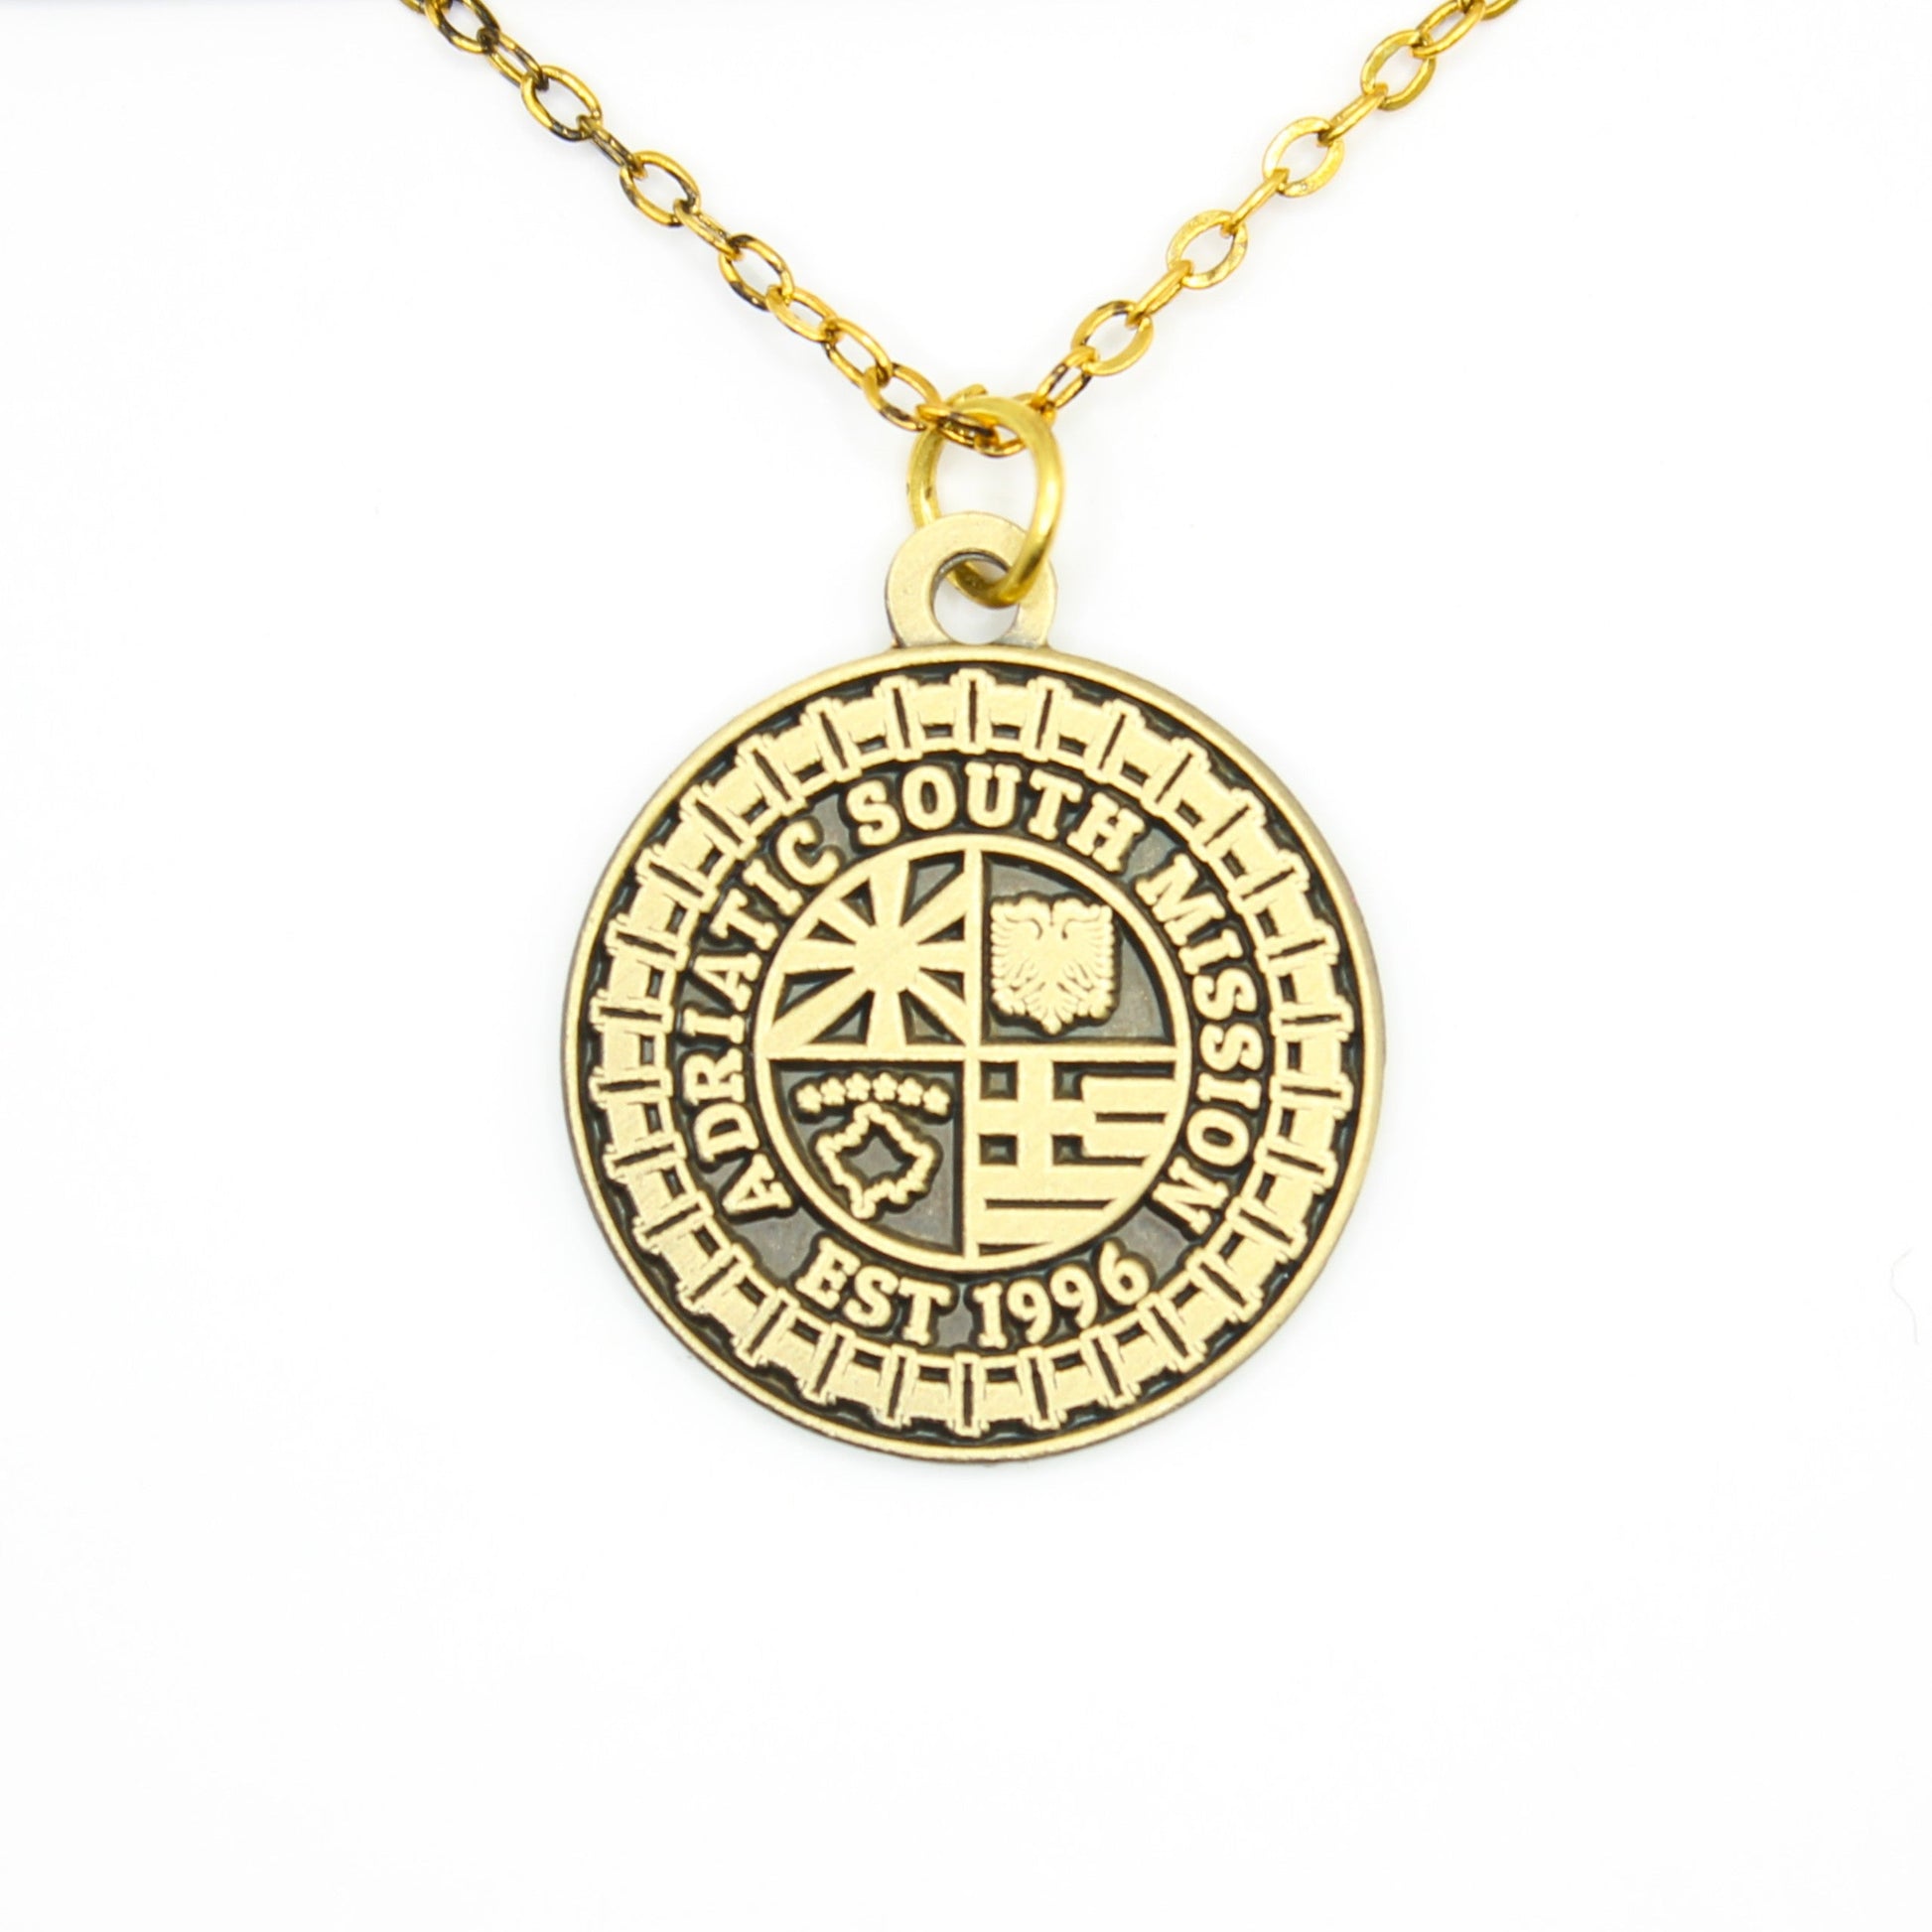 adriatic south mission necklace